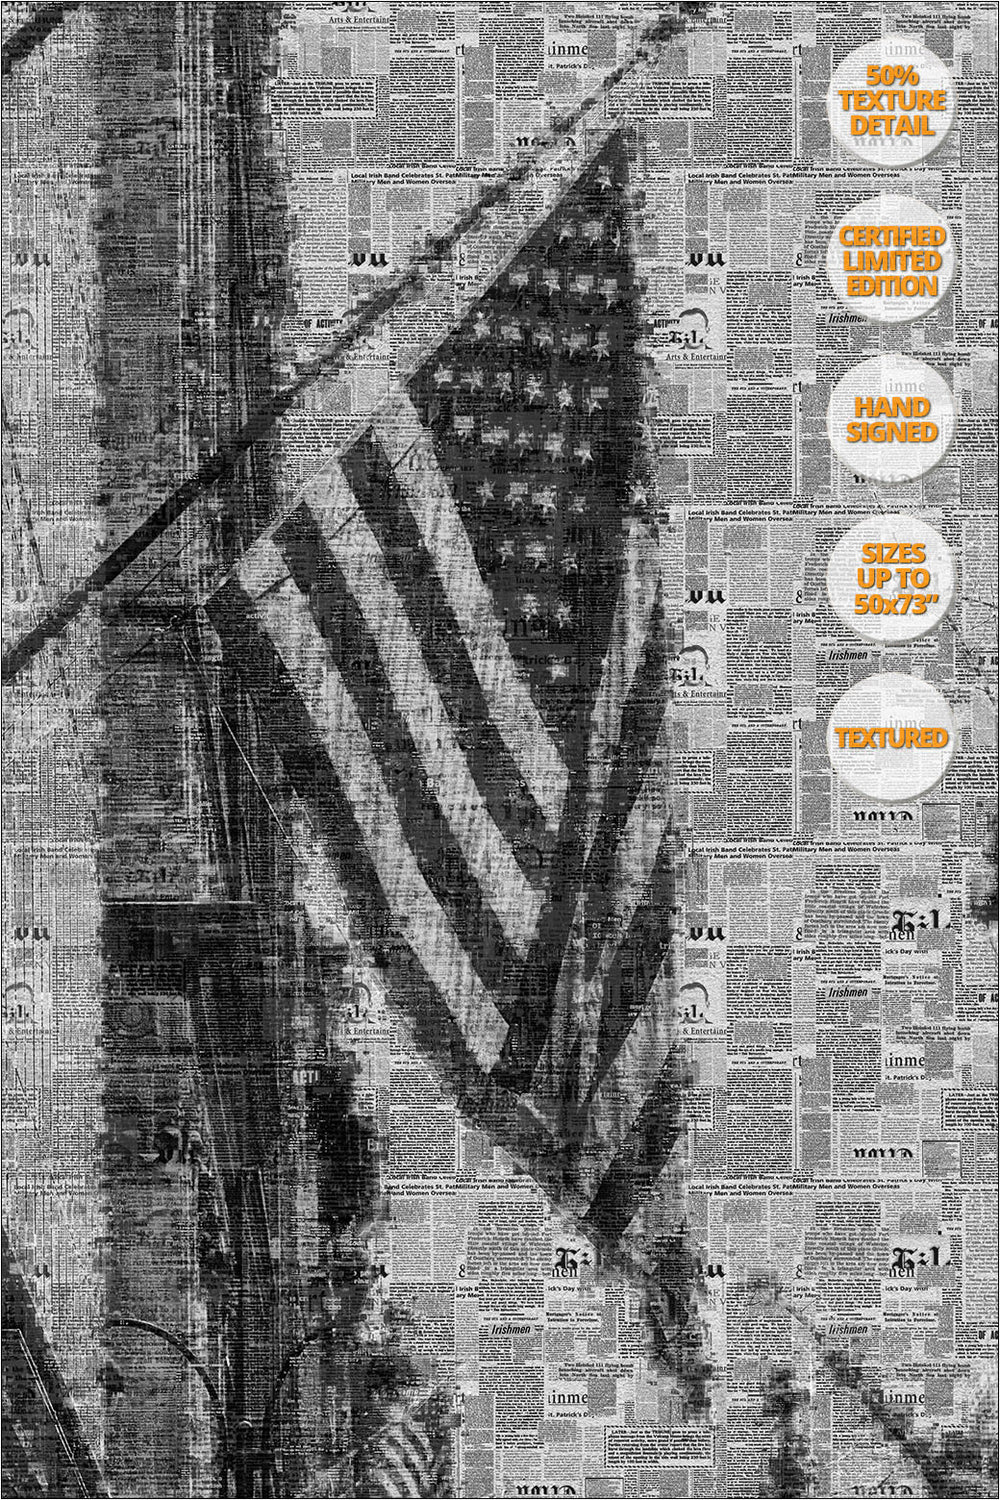 Flag in the Fifth Avenue, NYC. Already Written Series. | 50% Detail.